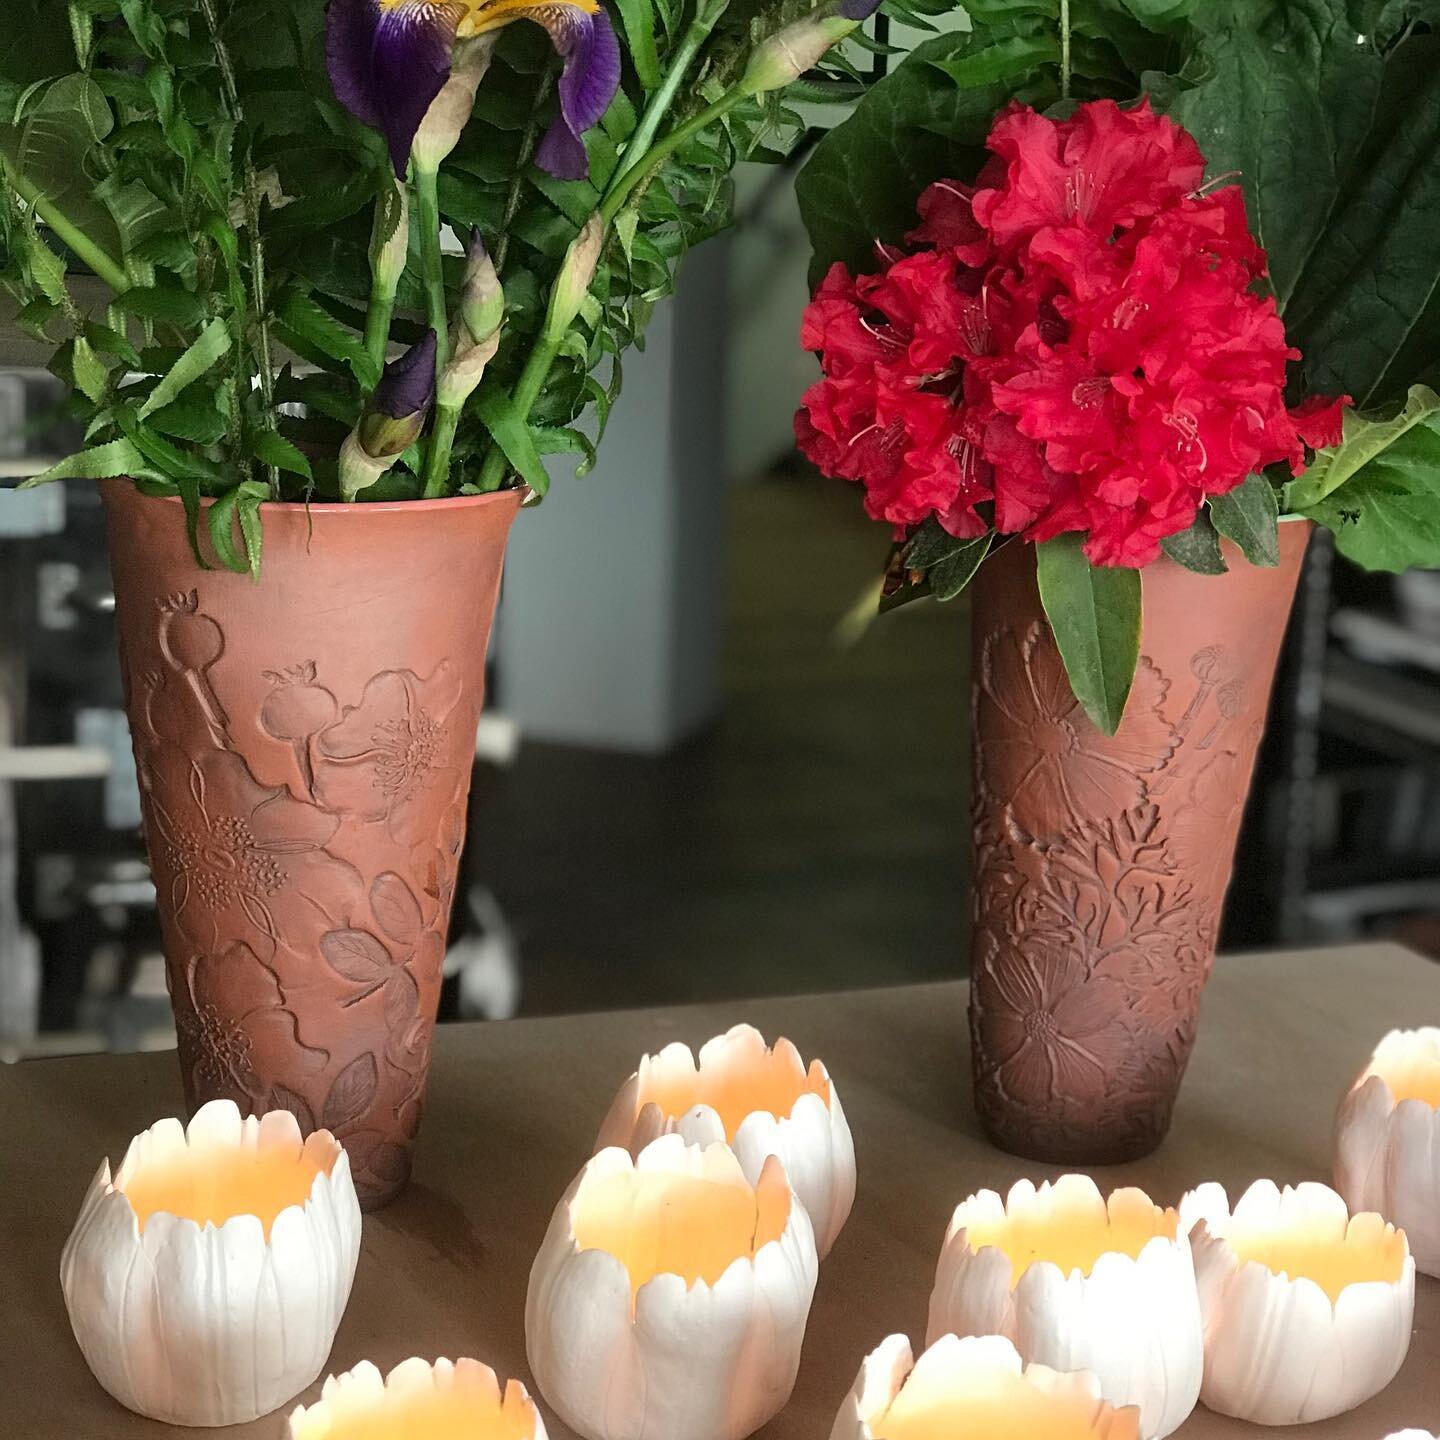 Happy Mother&rsquo;s Day!!
Terra-cotta vases $85., tulip votives $55. Email me sydsheraclayart@gmail.com. re pickup and choices! #equinoxstudiosseattle, #sydsheraclayart